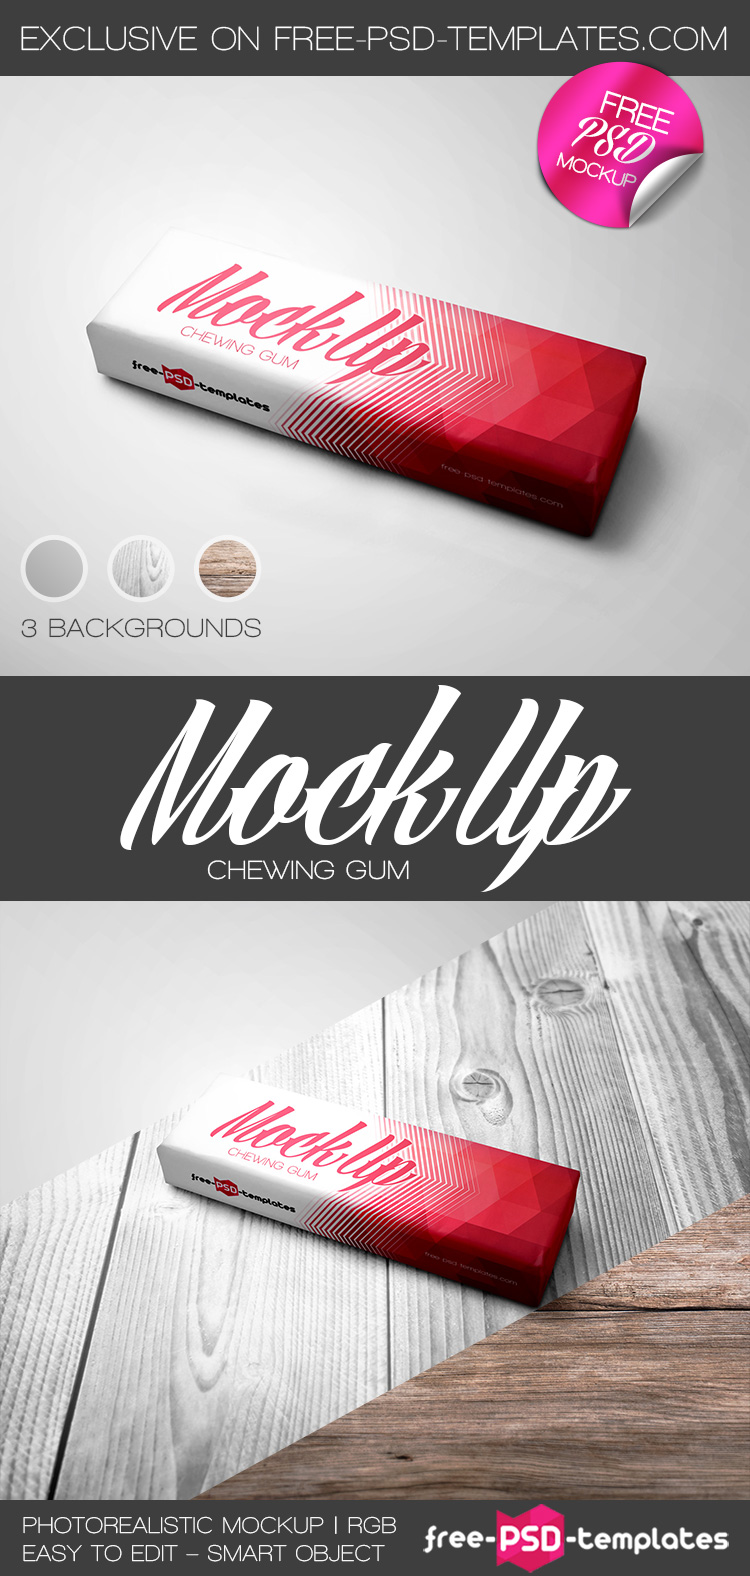 Download Free Chewing Gum Mock Up In Psd Free Psd Templates